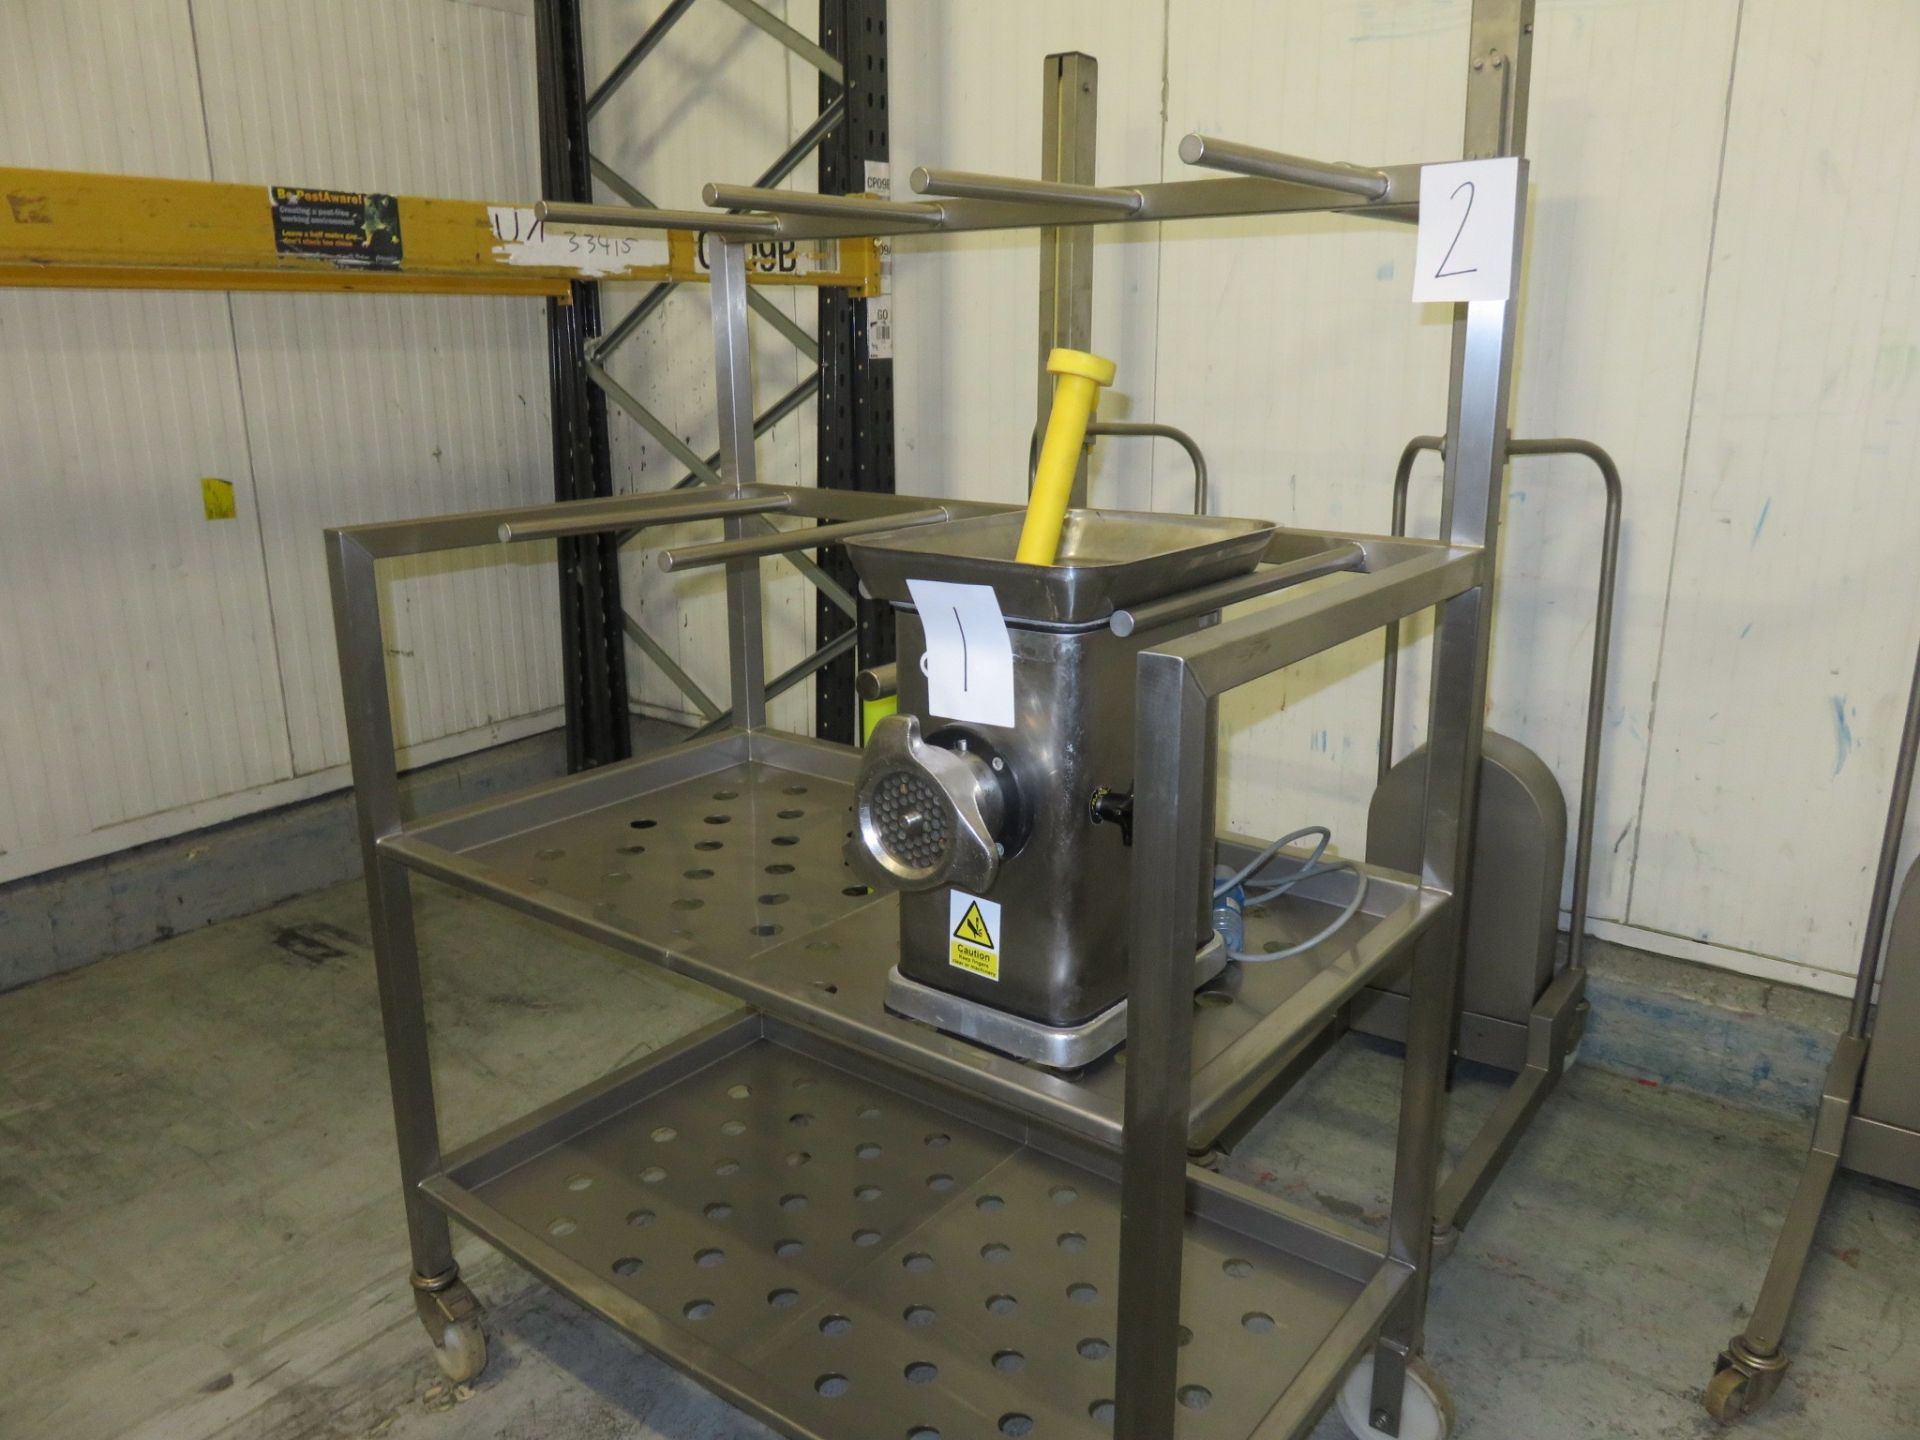 S/s mobile Trolley/Reel Holder, 2 shelves.Approx 1200 x 700 x 1600mm high.Manufactured by Icon LO£10